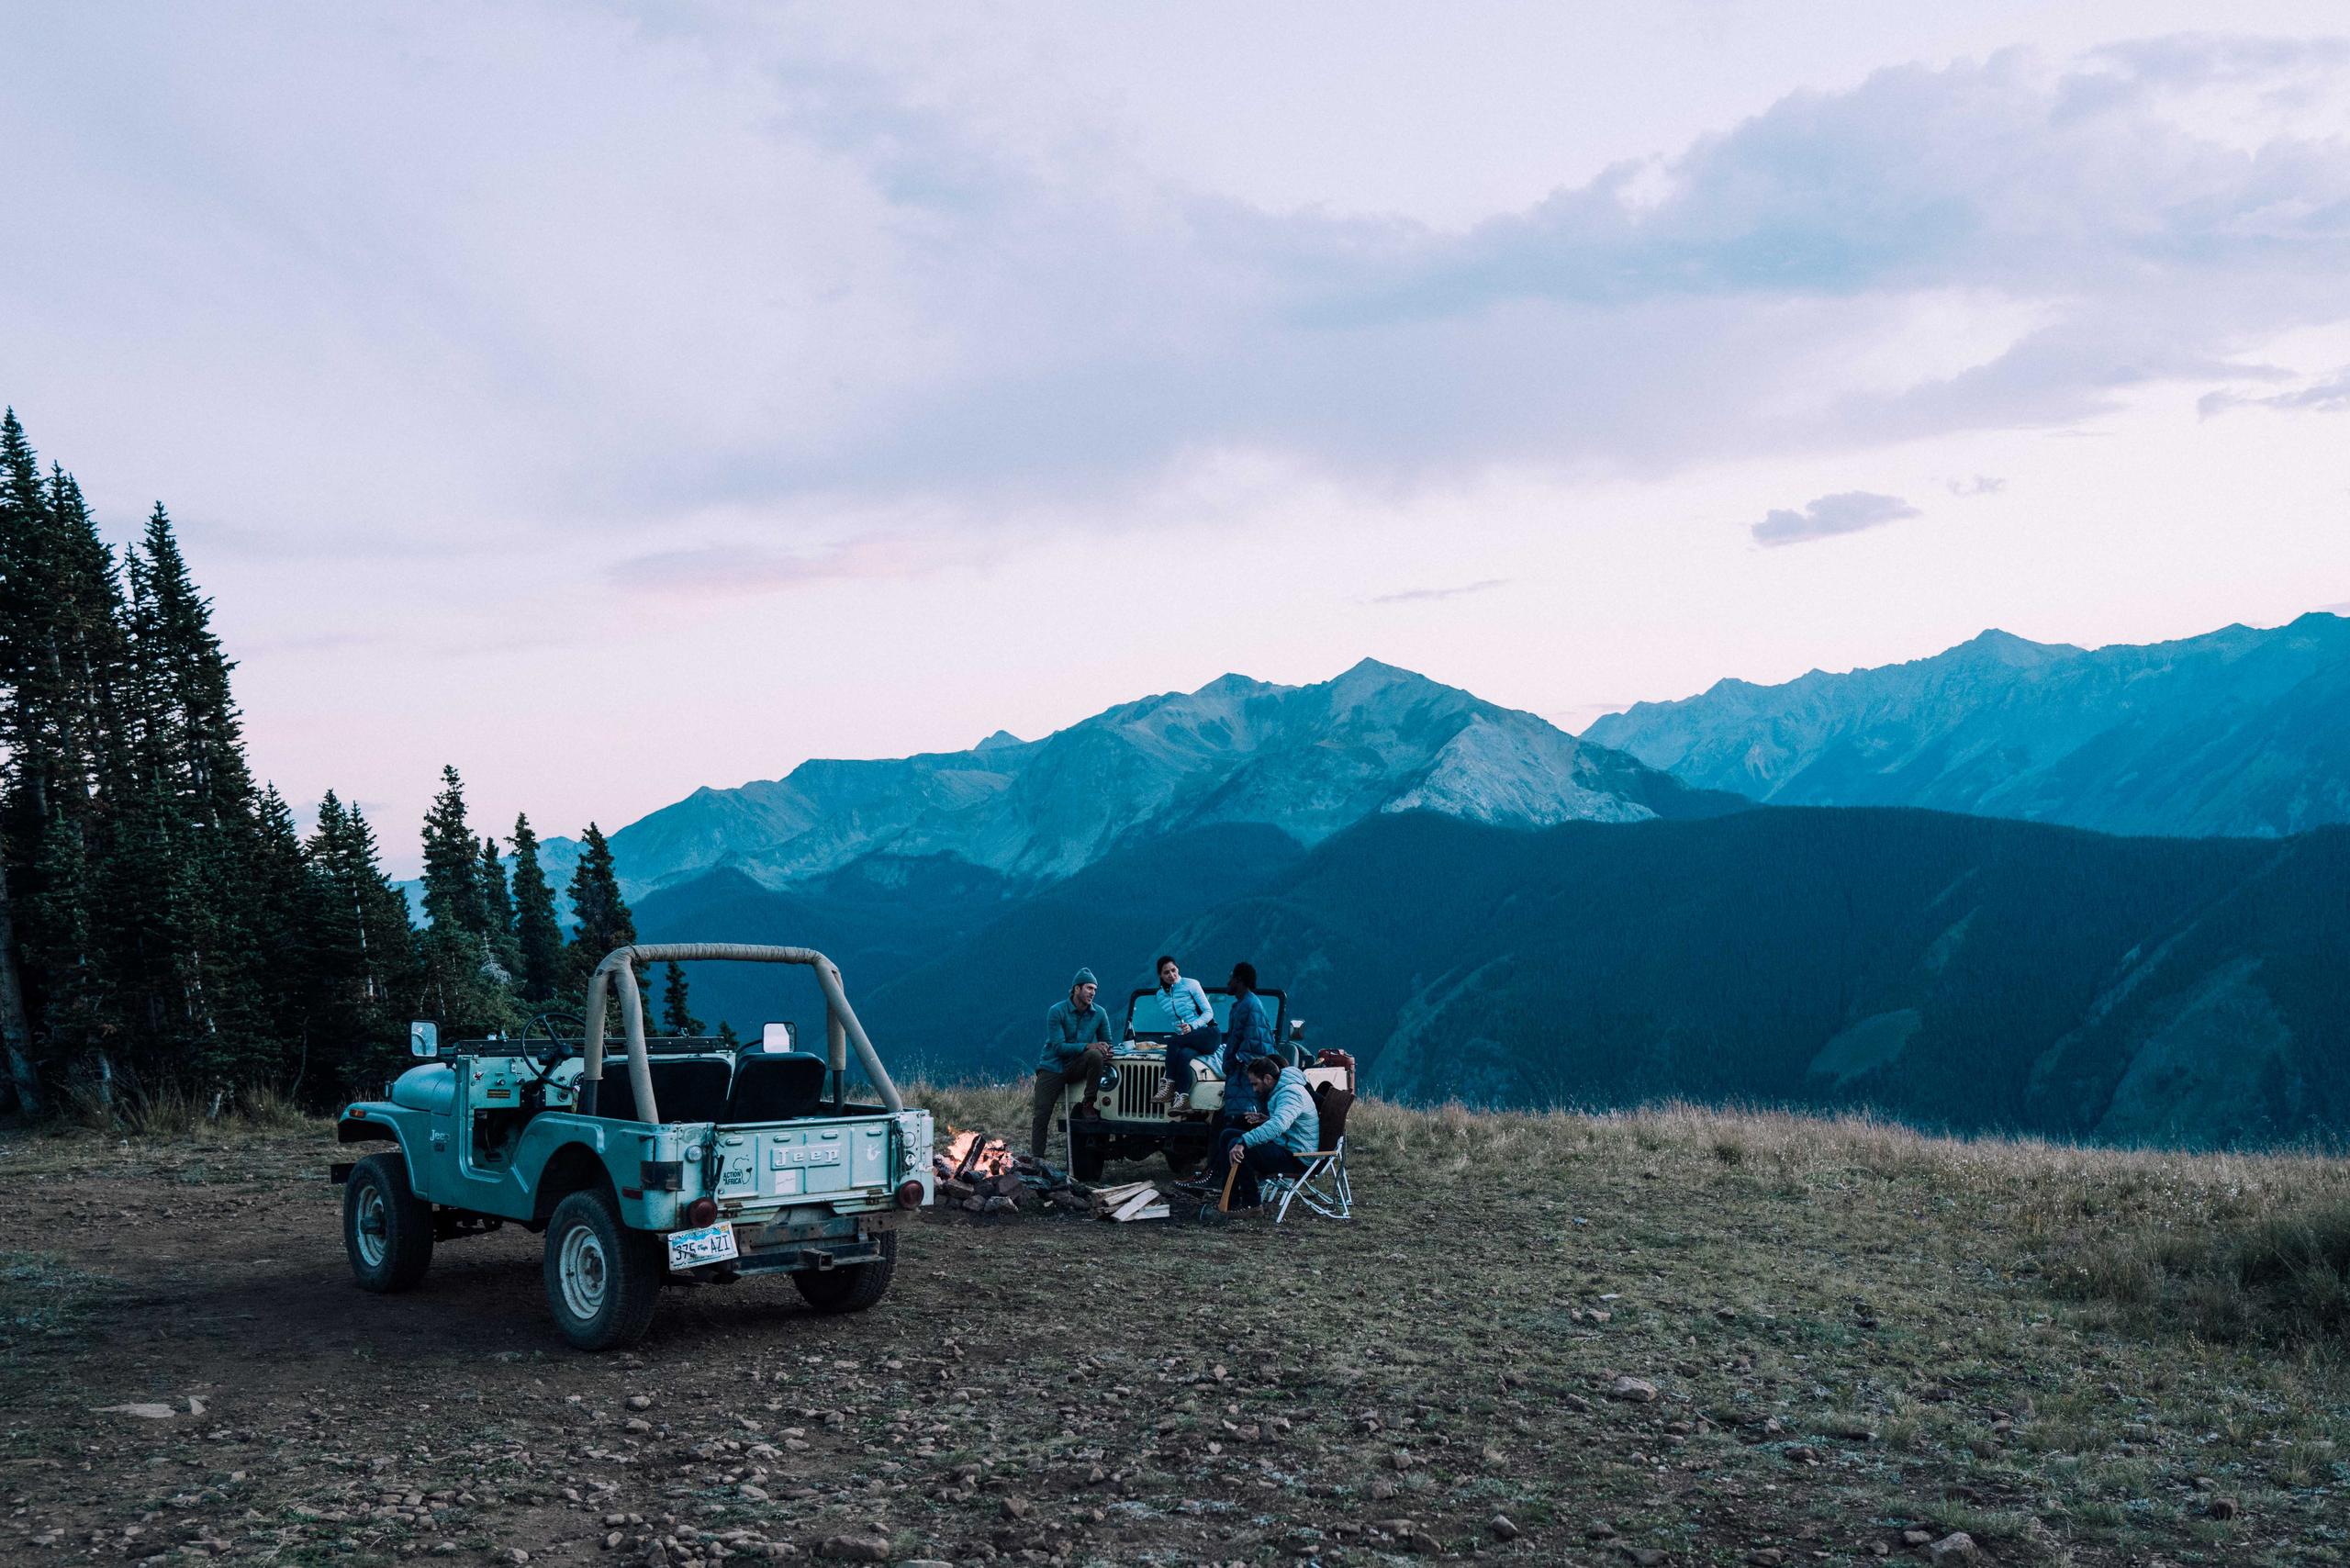 Four friends around campfire and vintage Jeep at dusk in Aspen mountains